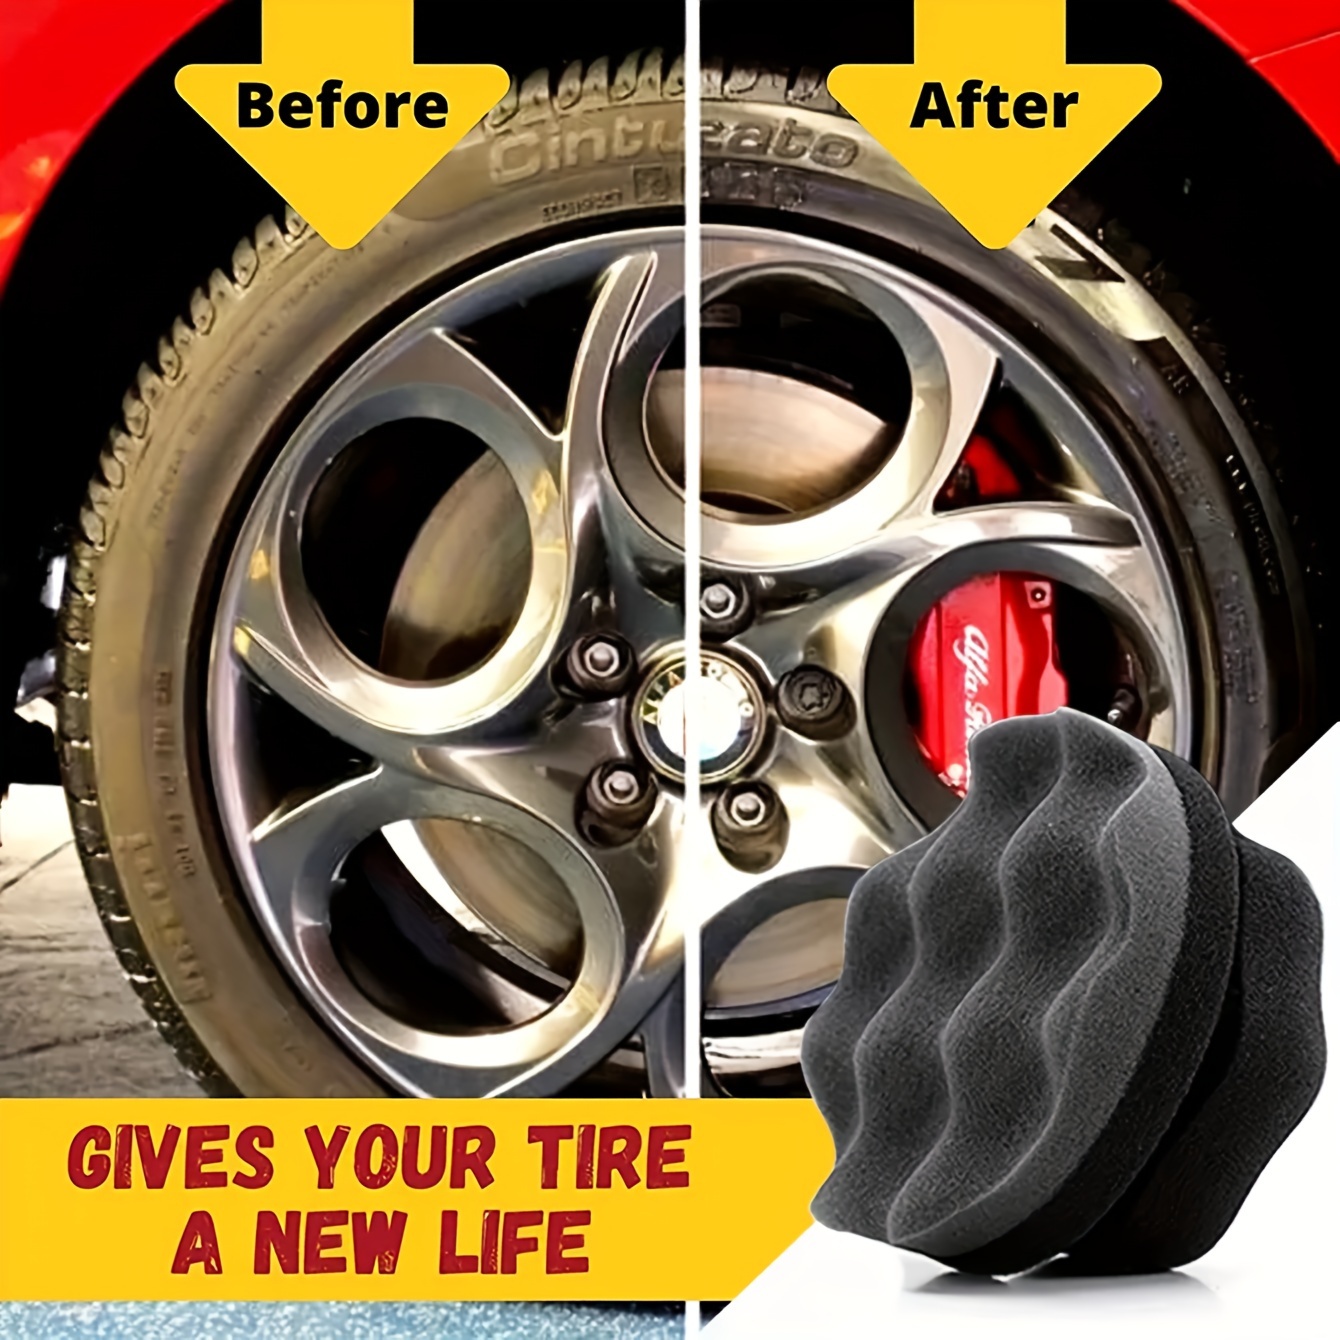 

Easy Grip Car Washing Sponge: High Density, Wavy Design For Tire And Wheel Cleaning - Durable And Effective For Auto Detailing